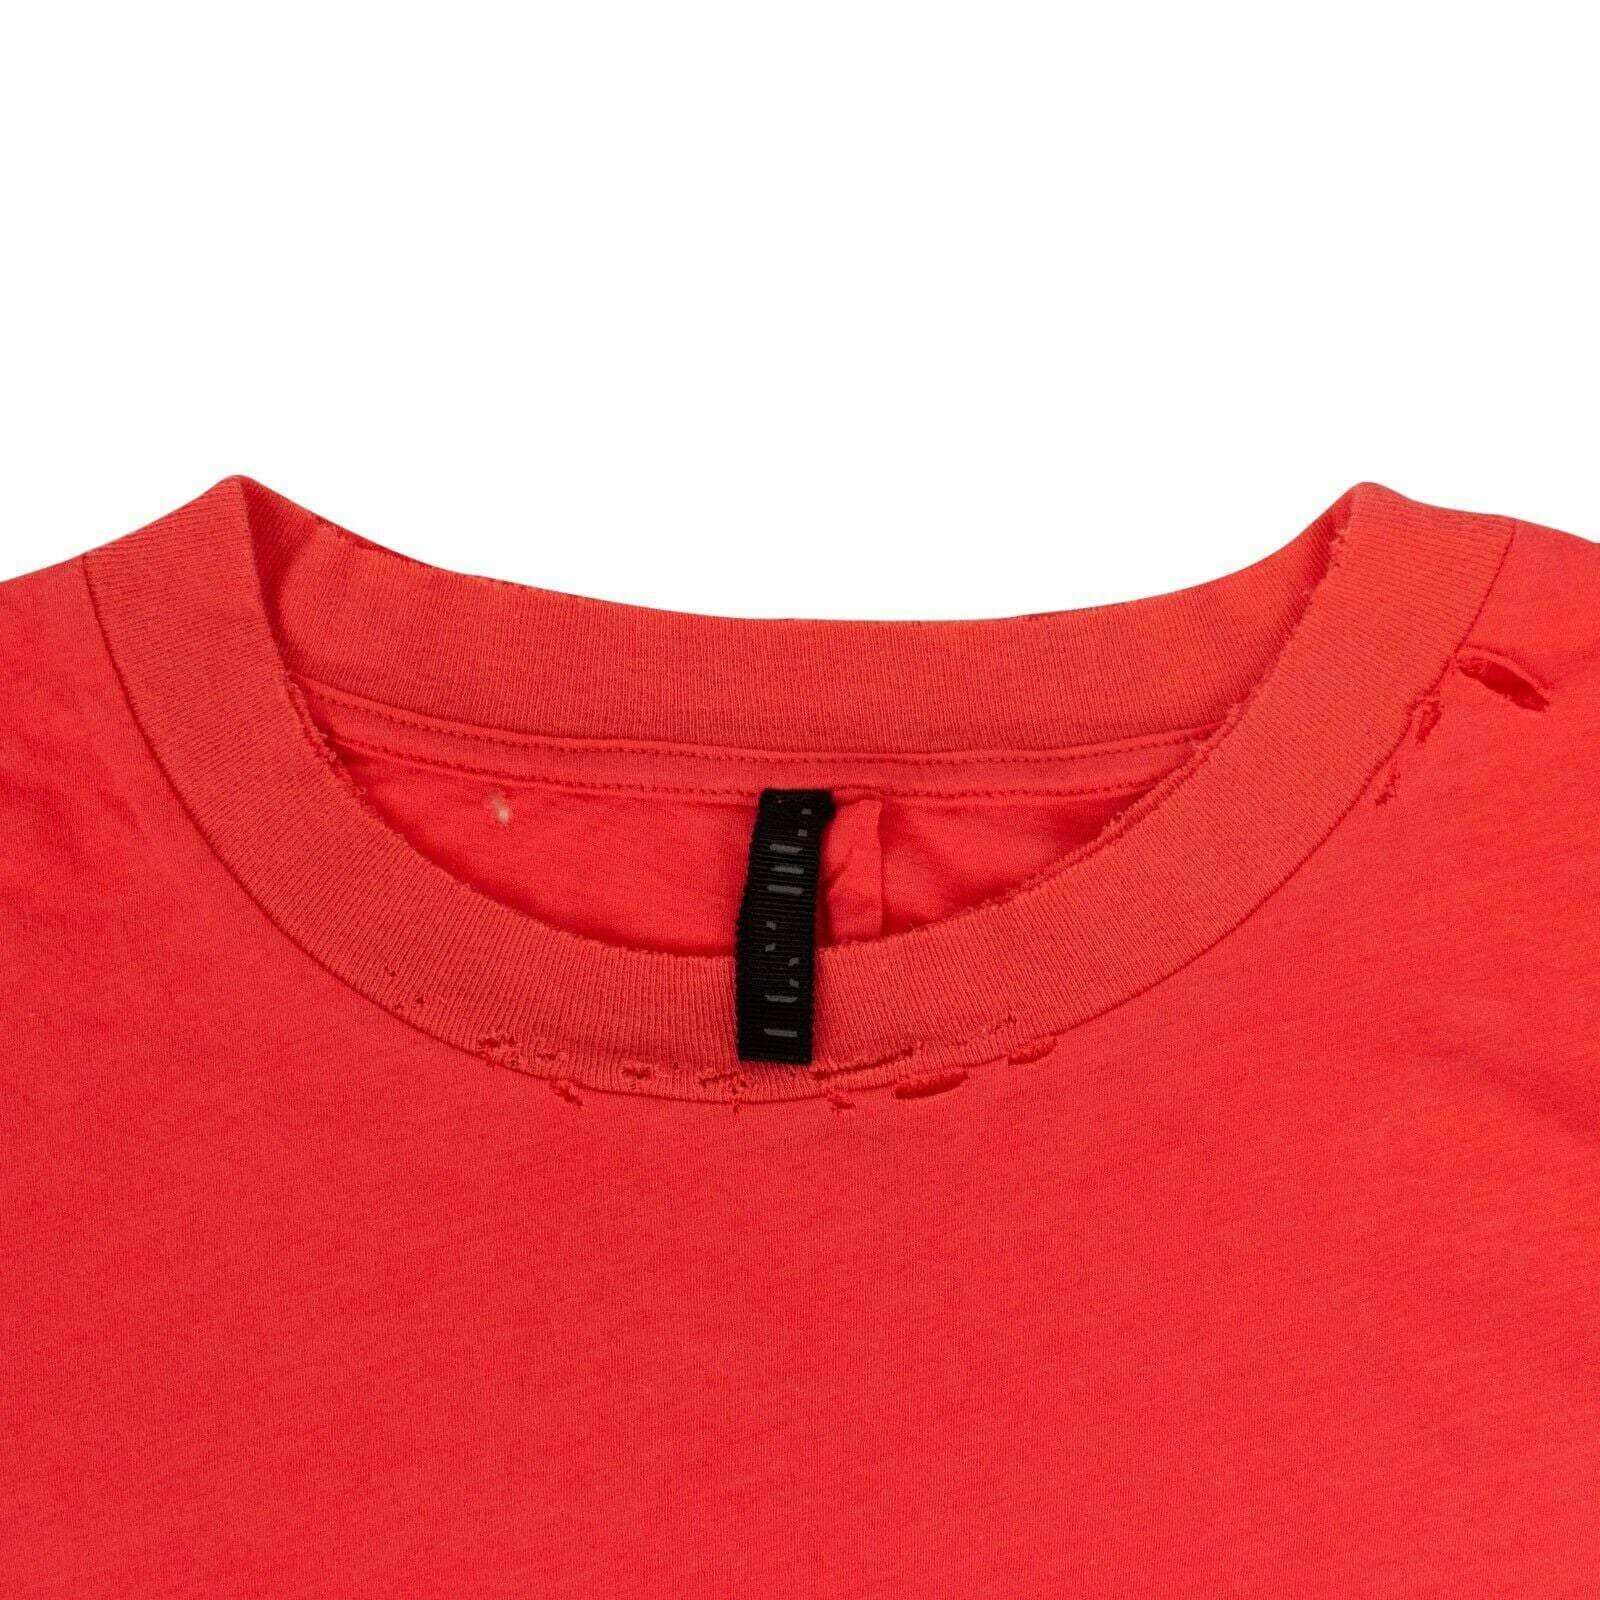 Unravel Project Women's T-Shirts S Cotton Distressed Short Sleeve T-Shirt Top - Red JF6-UN-1045/S JF6-UN-1045/S